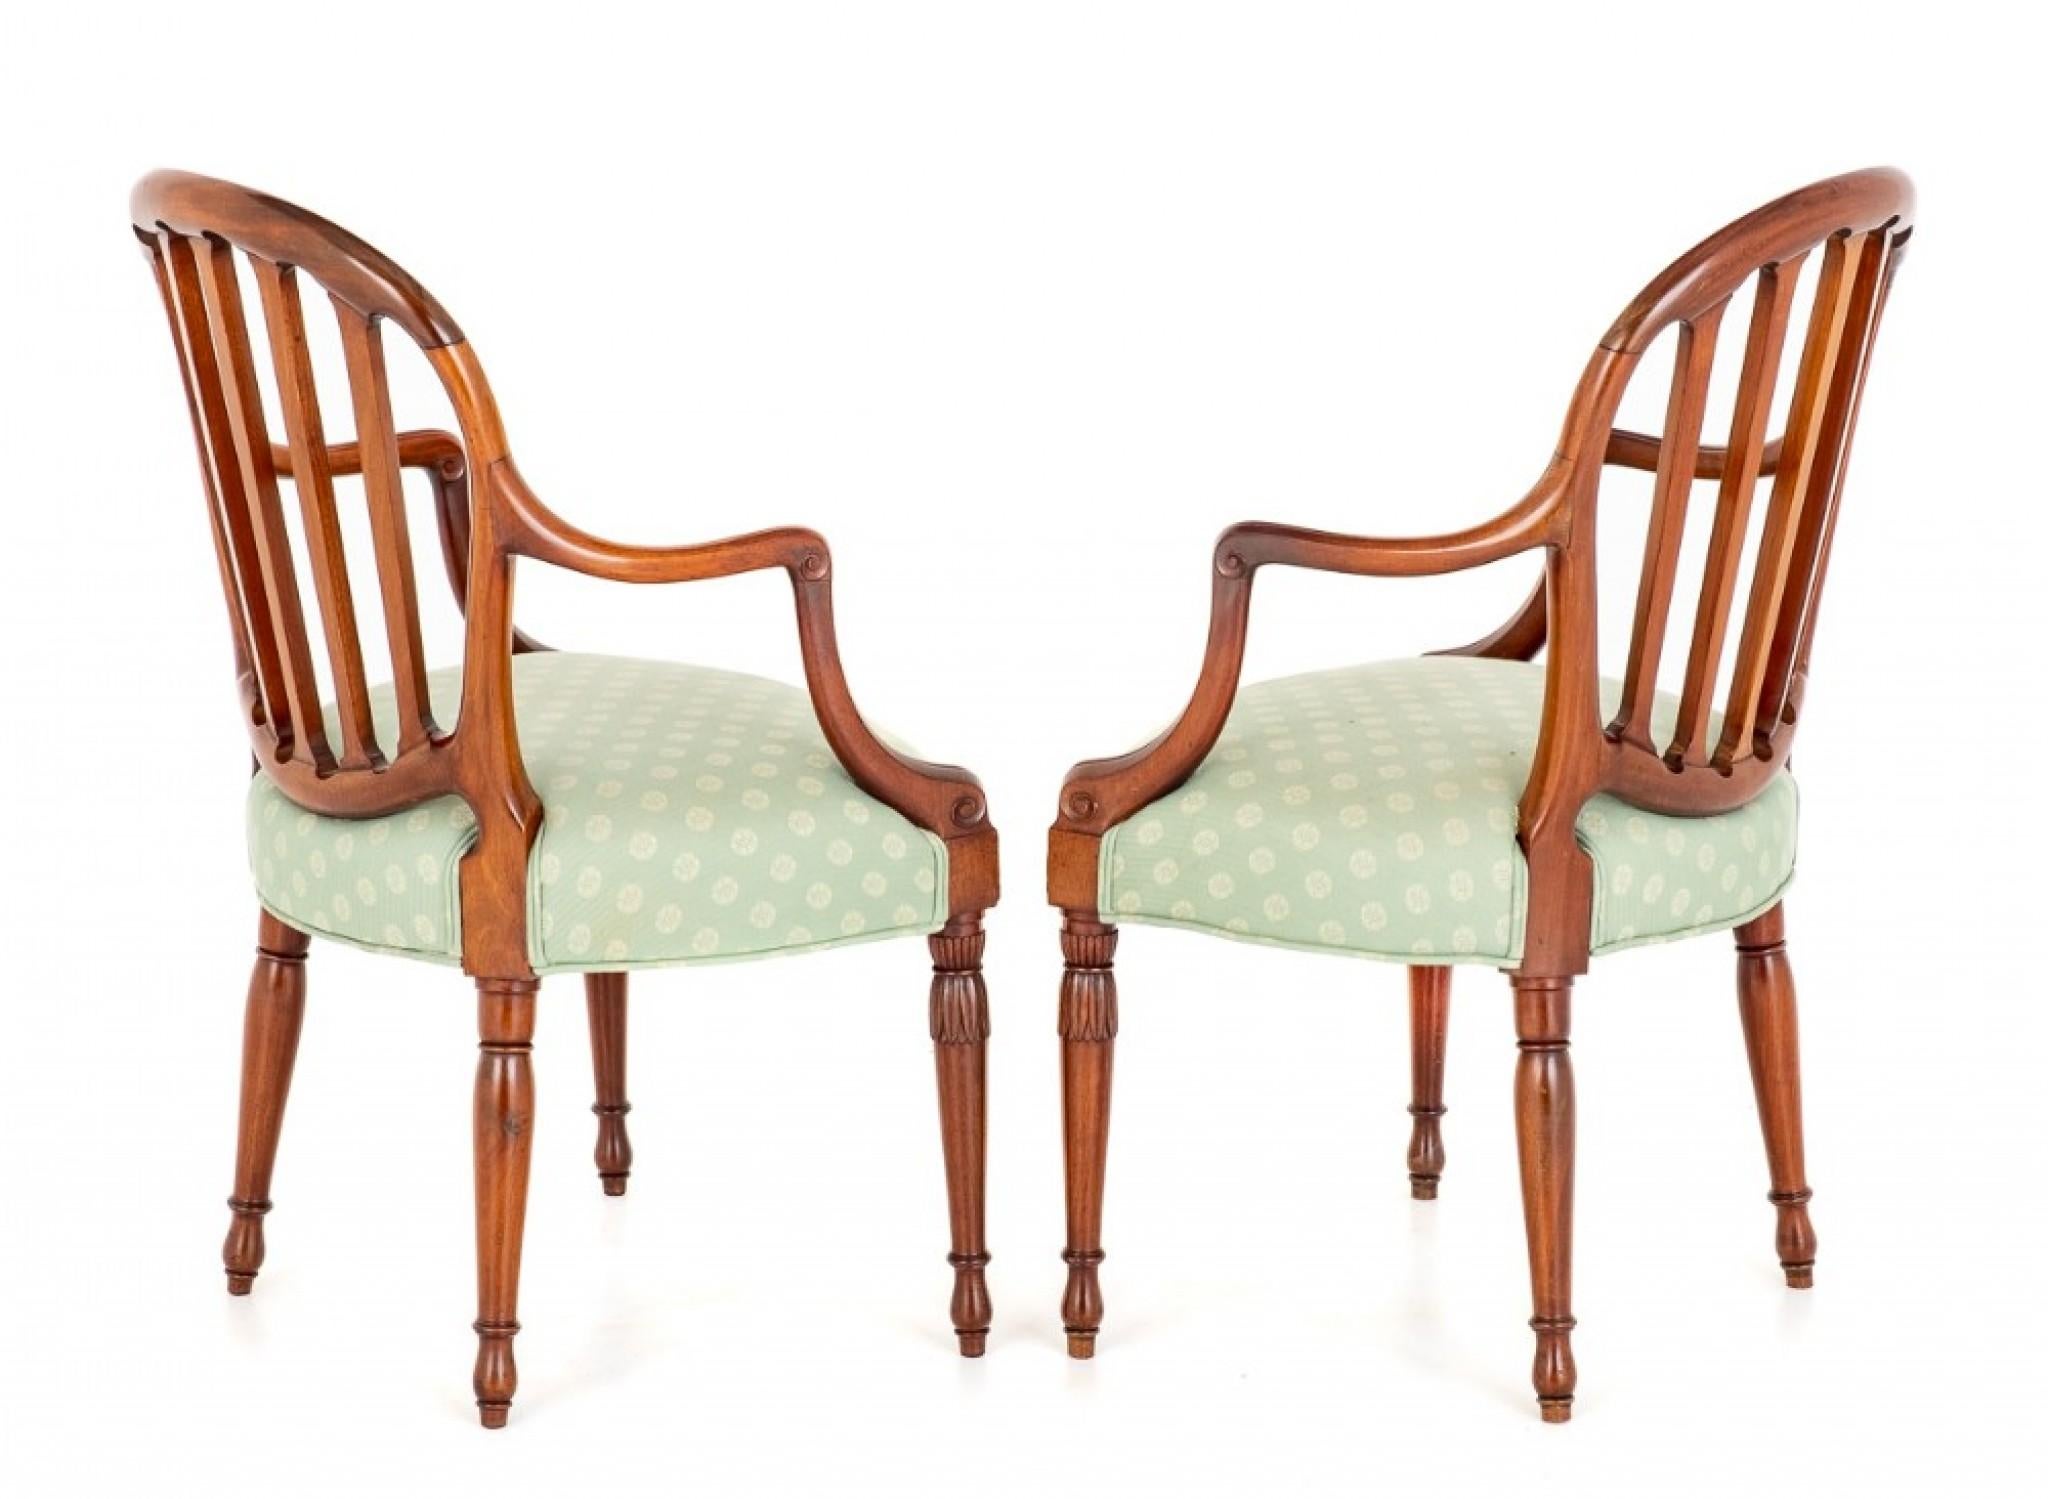 A good quality pair of mahogany hepplewhite revival open arm chairs.
The front legs being of a turned and carved form.
circa 1900
The arm supports being of a shaped form.
The shaped backs of the chairs having five uprights with floral